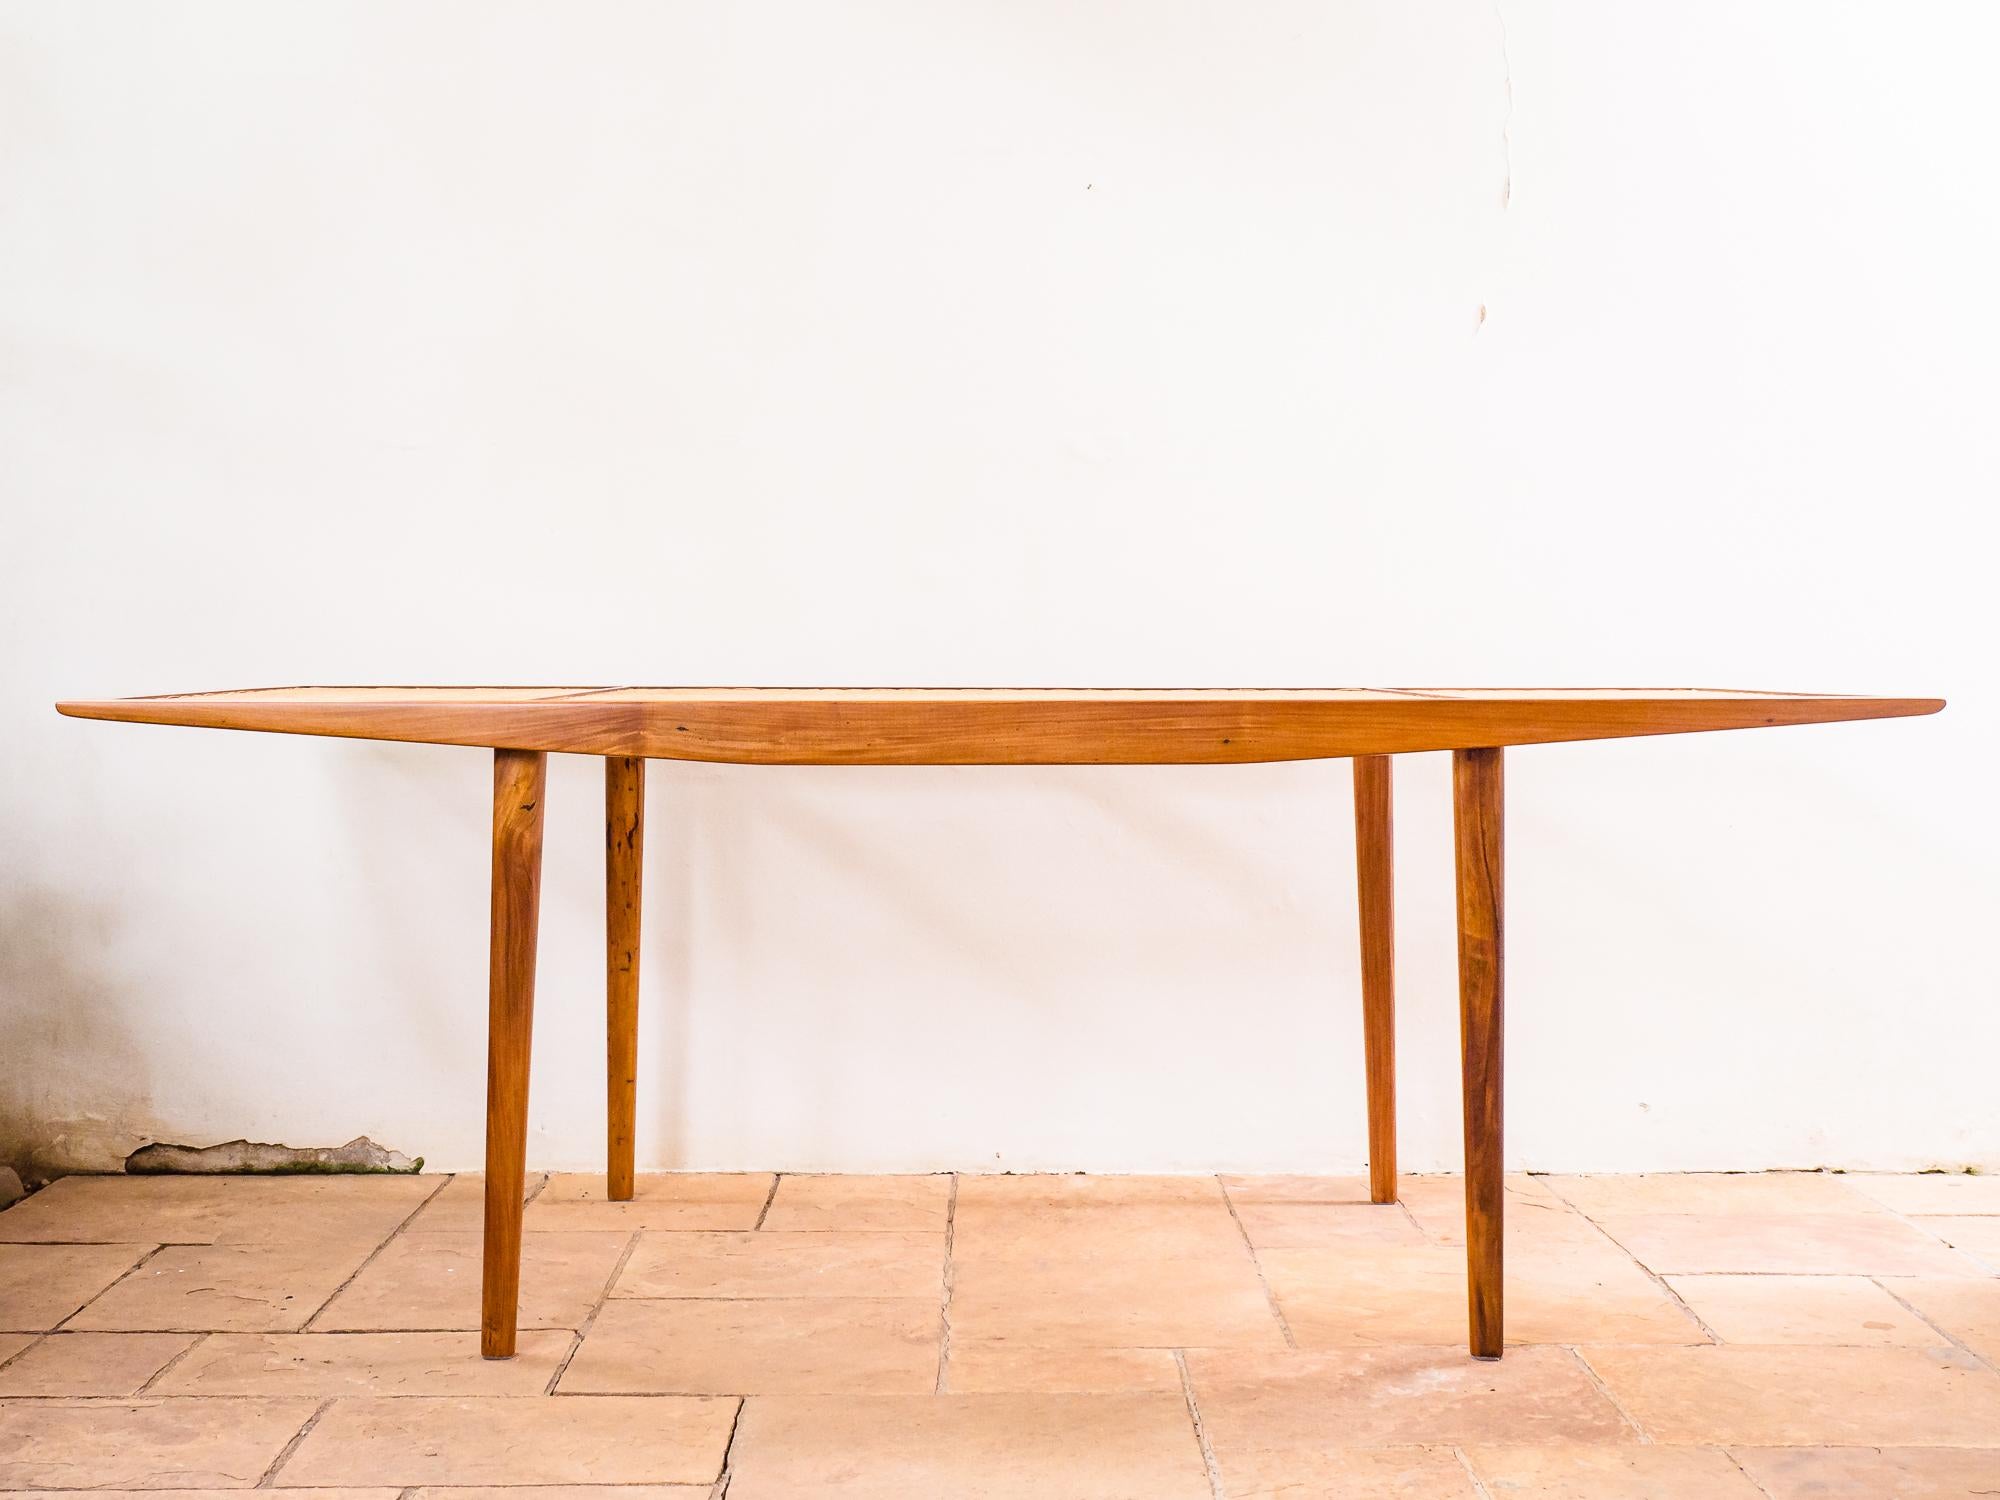 Dining Table in Caviuna and Cane Weaving by Martin Eisler, Brazil Modern, 1950s In Excellent Condition For Sale In Sao Paulo, SP